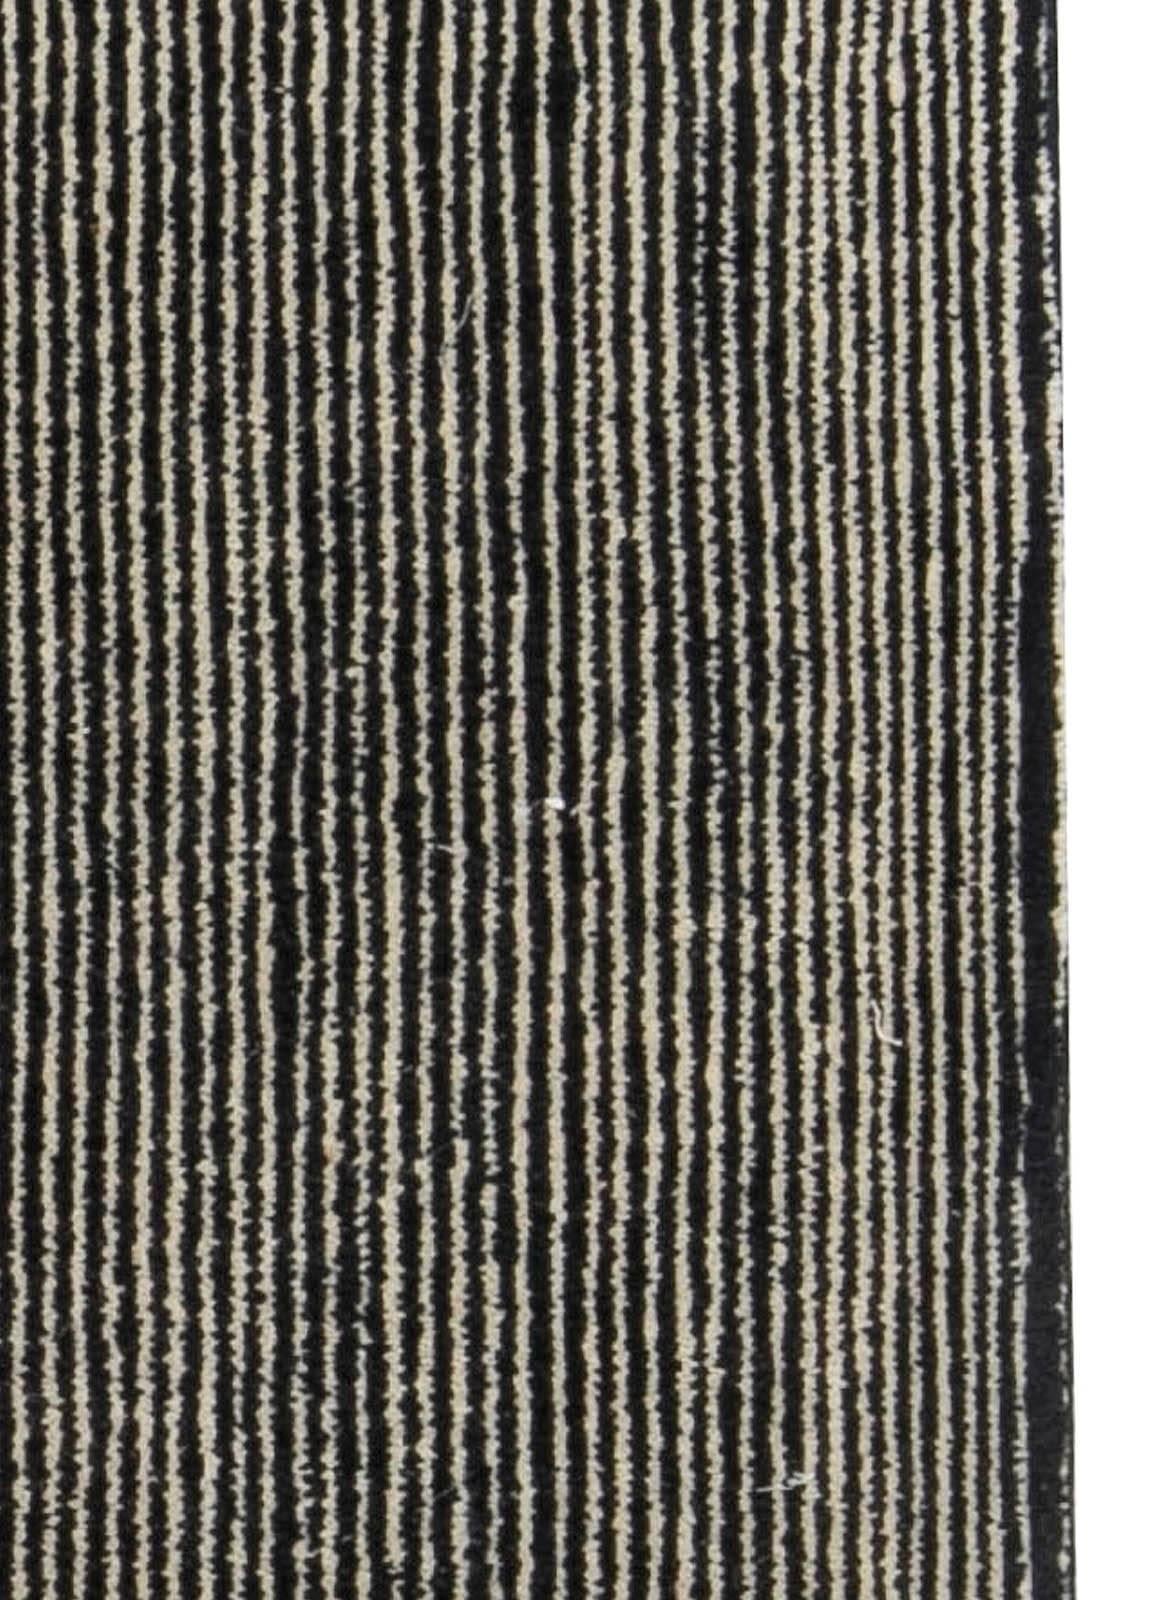 Hand-Knotted High-Quality Contemporary Striped Gray Handmade Rug by Doris Leslie Blau For Sale